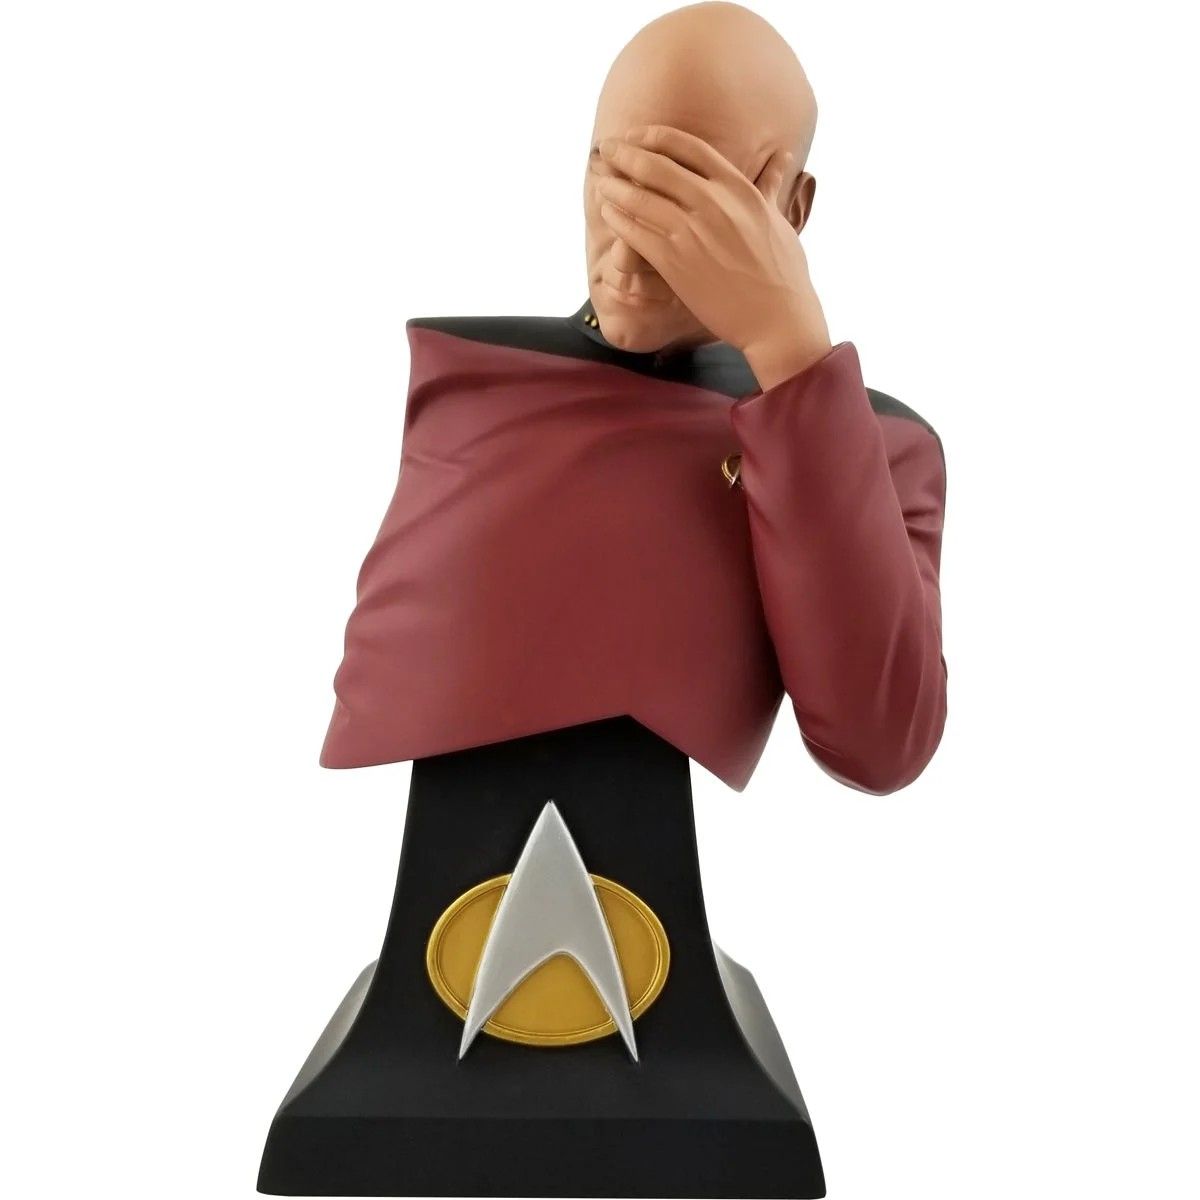 Picard Facepalming Collectible Bust Front View